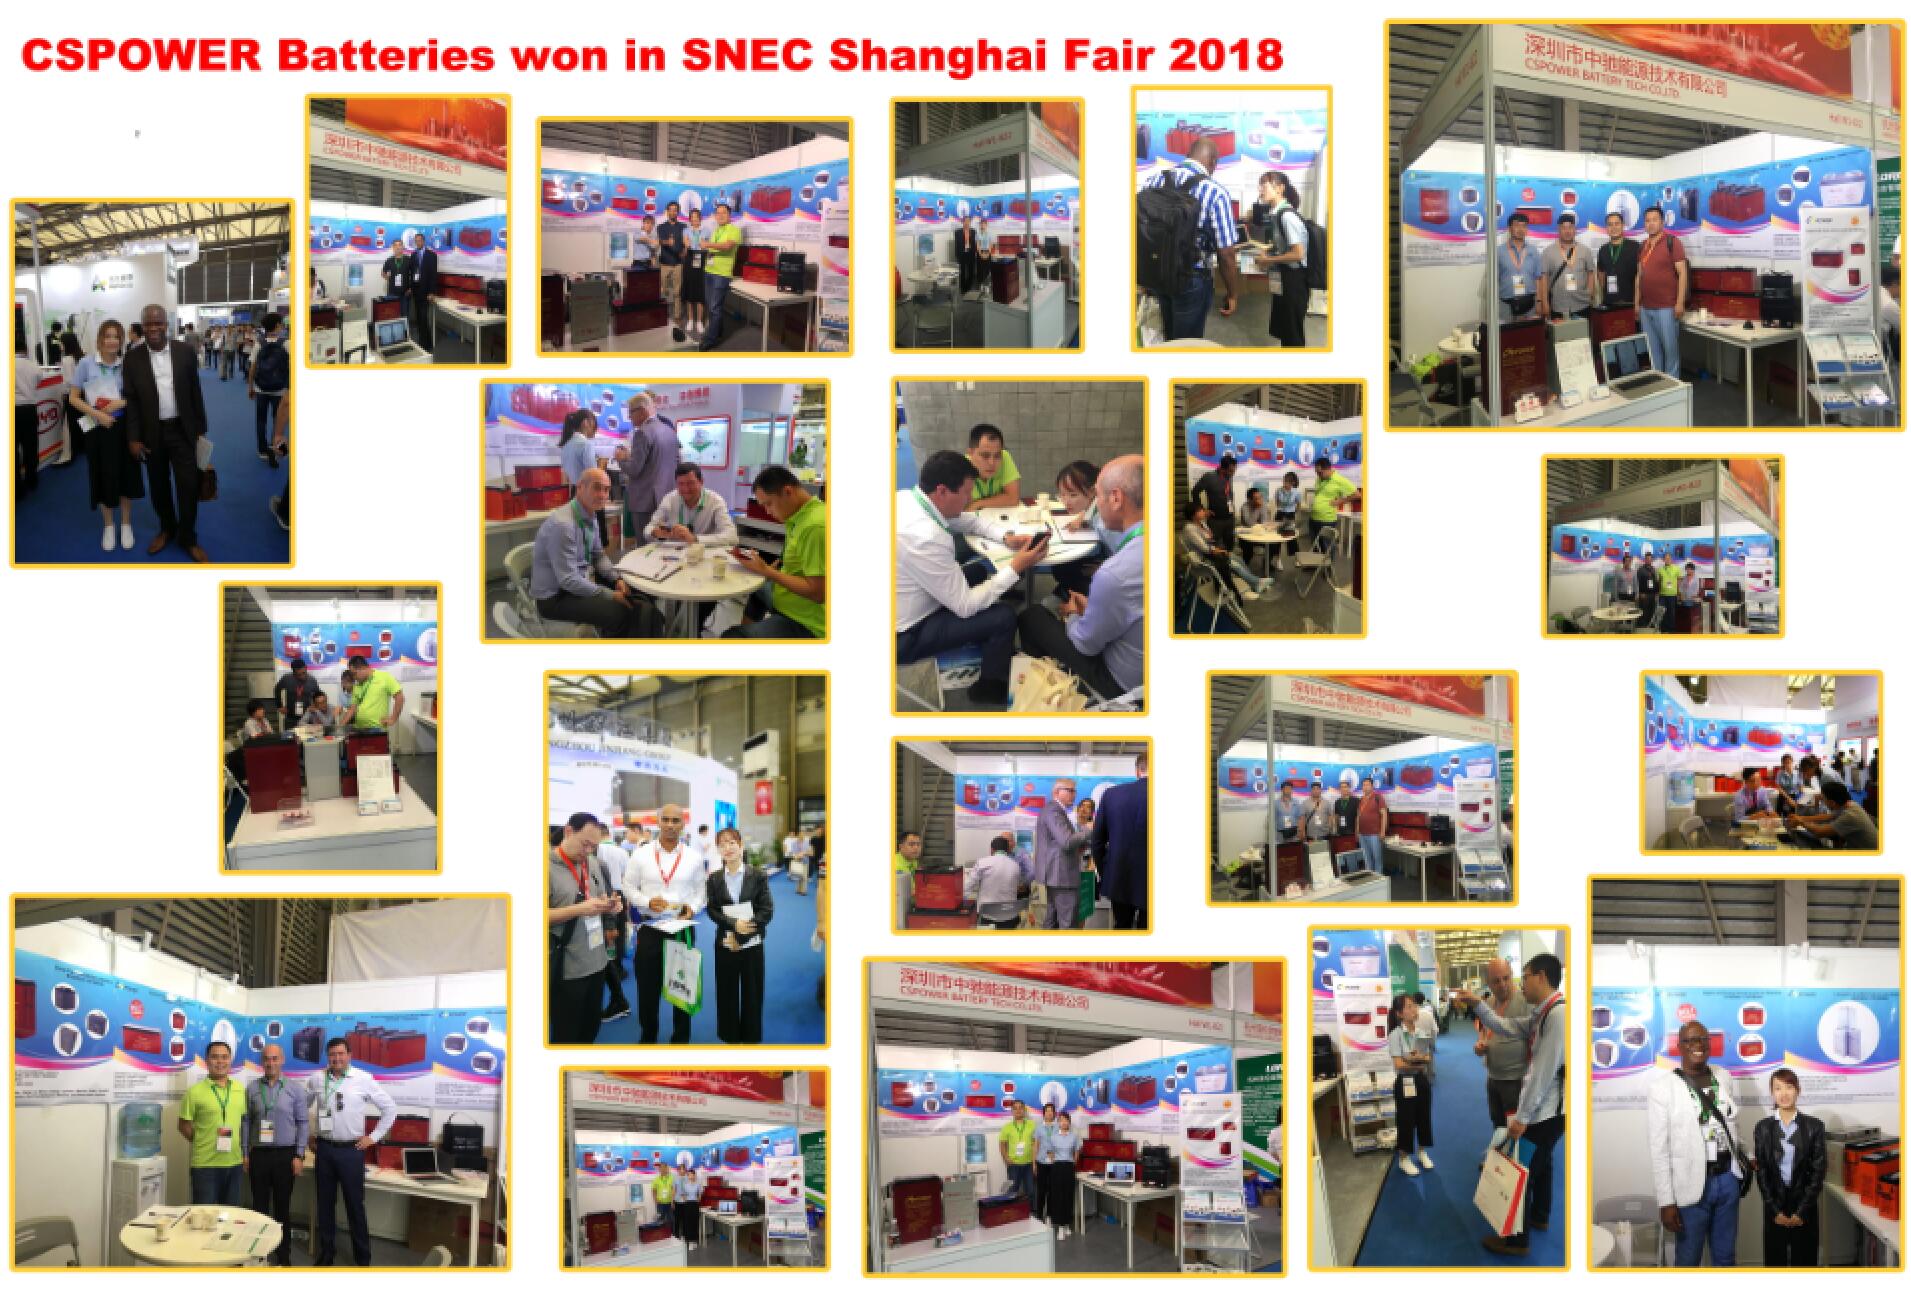 In the pasted SNEC professional solar exhibition attened in Shanghai which finished on 30th May, CSPOWER batteries won big success and various valued client